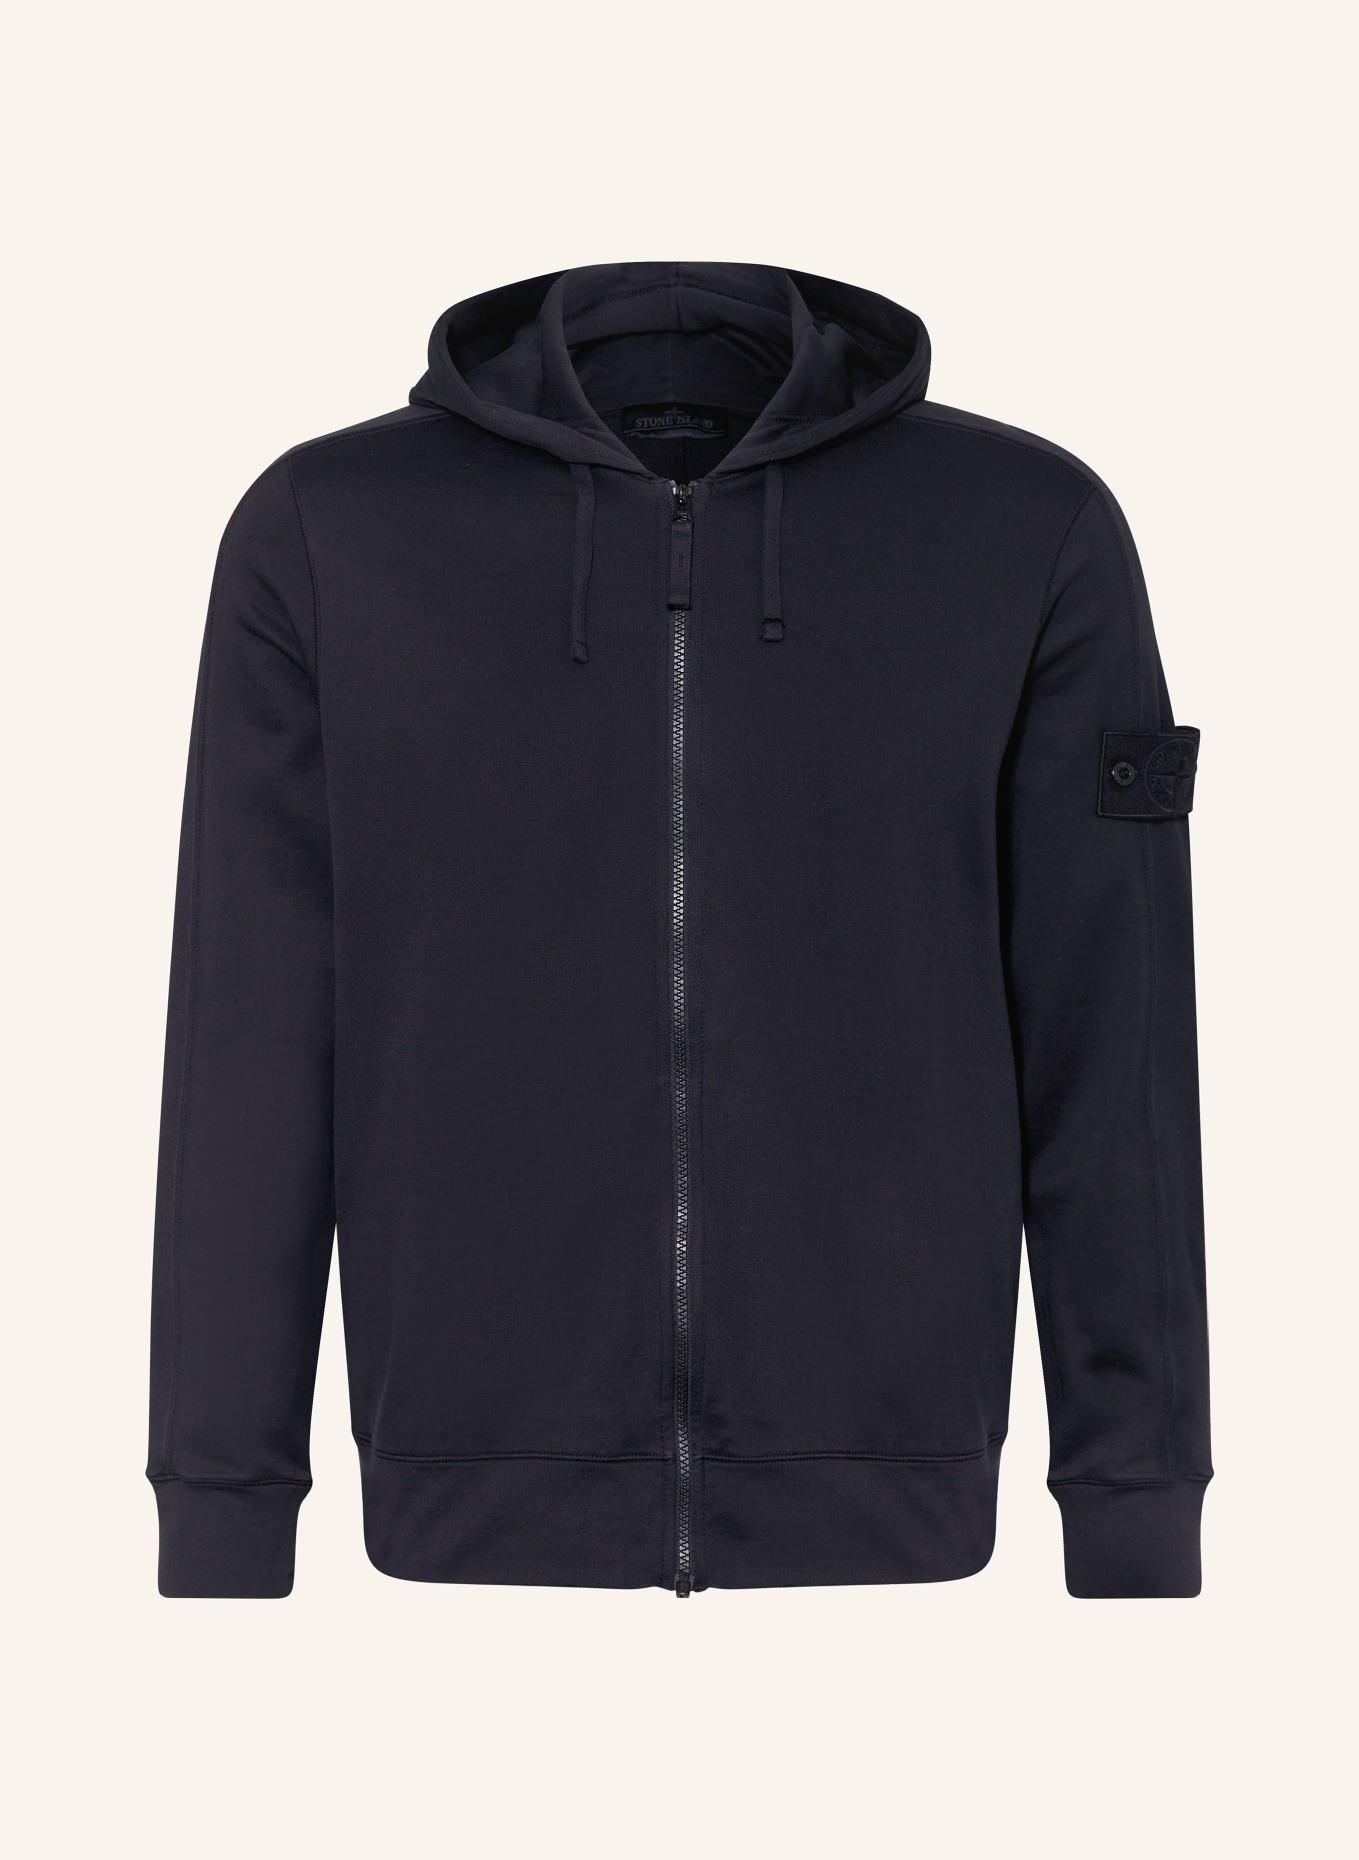 STONE ISLAND Sweat jacket in mixed materials, Color: DARK BLUE/ BLACK (Image 1)